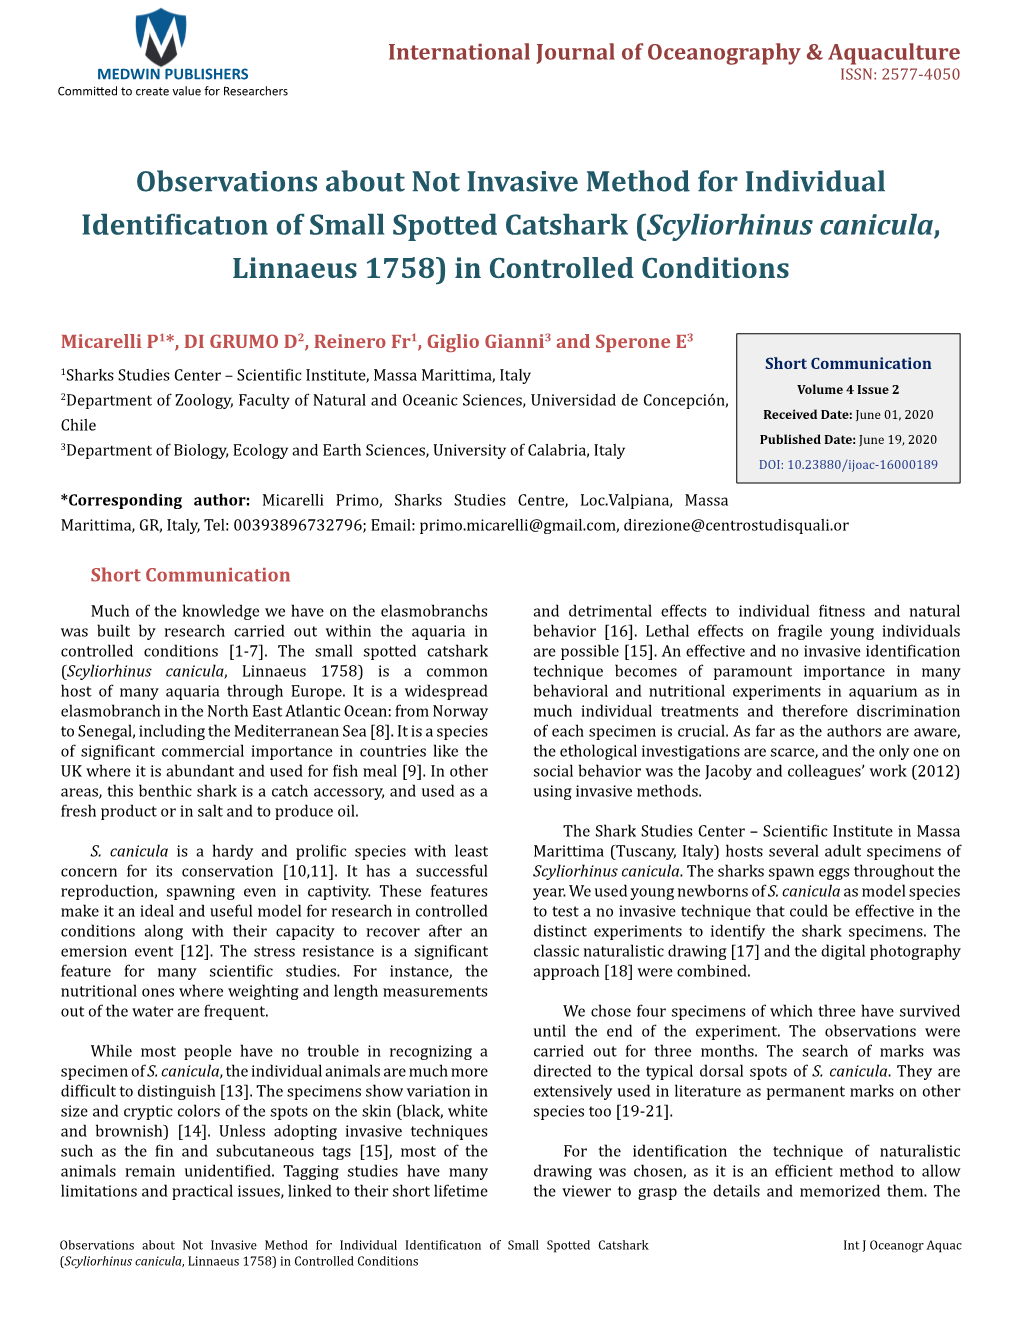 Micarelli P, Et Al. Observations About Not Invasive Method for Individual